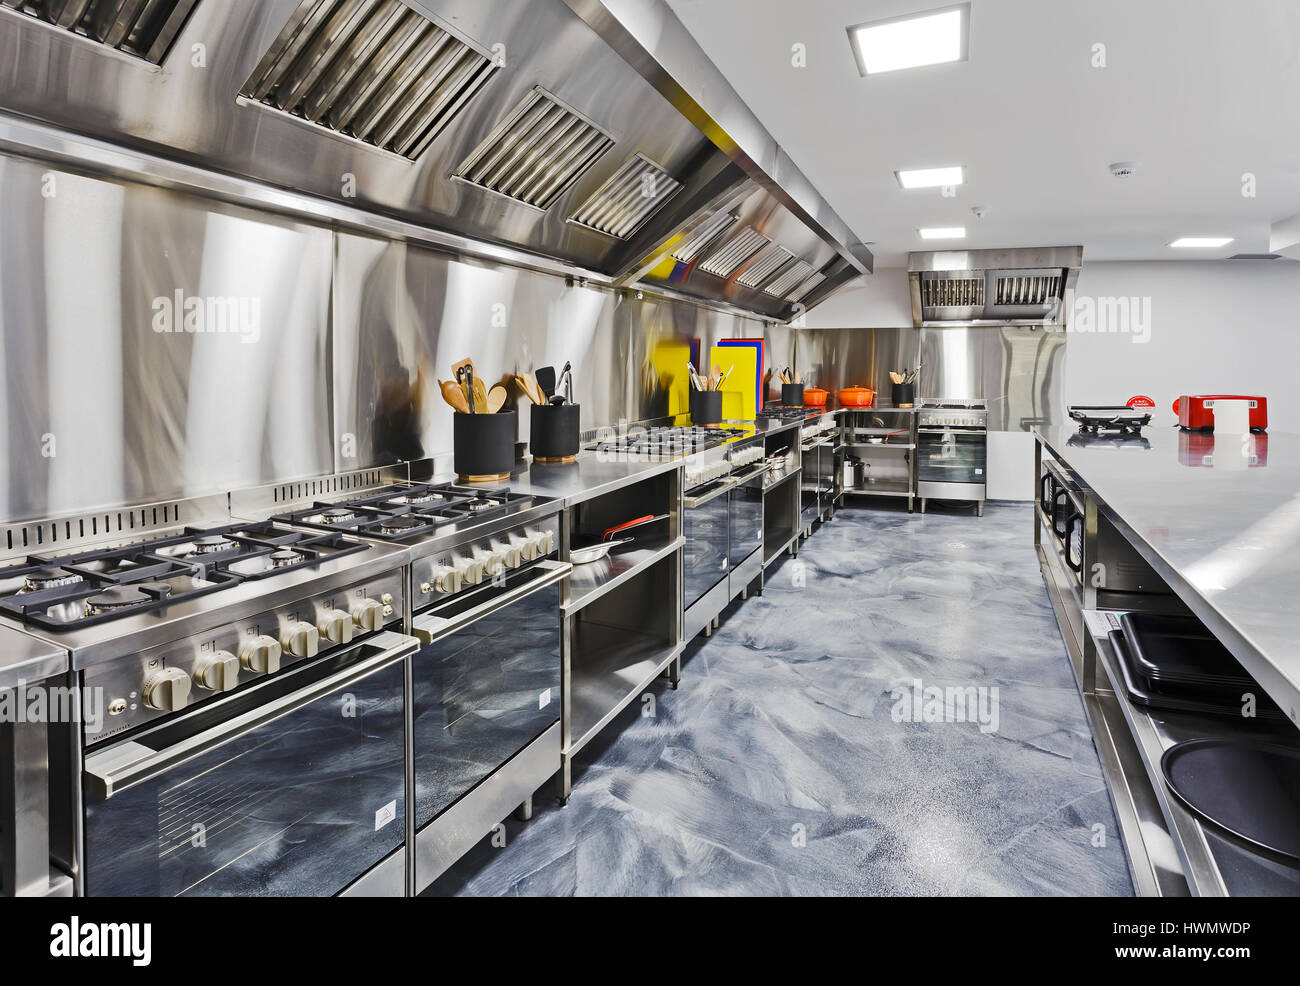 Modern shiny kitchen with stainless still kitchenware and equipment for restaurant-scale cooking with preparation tables, pans, pots, stoves. Stock Photo